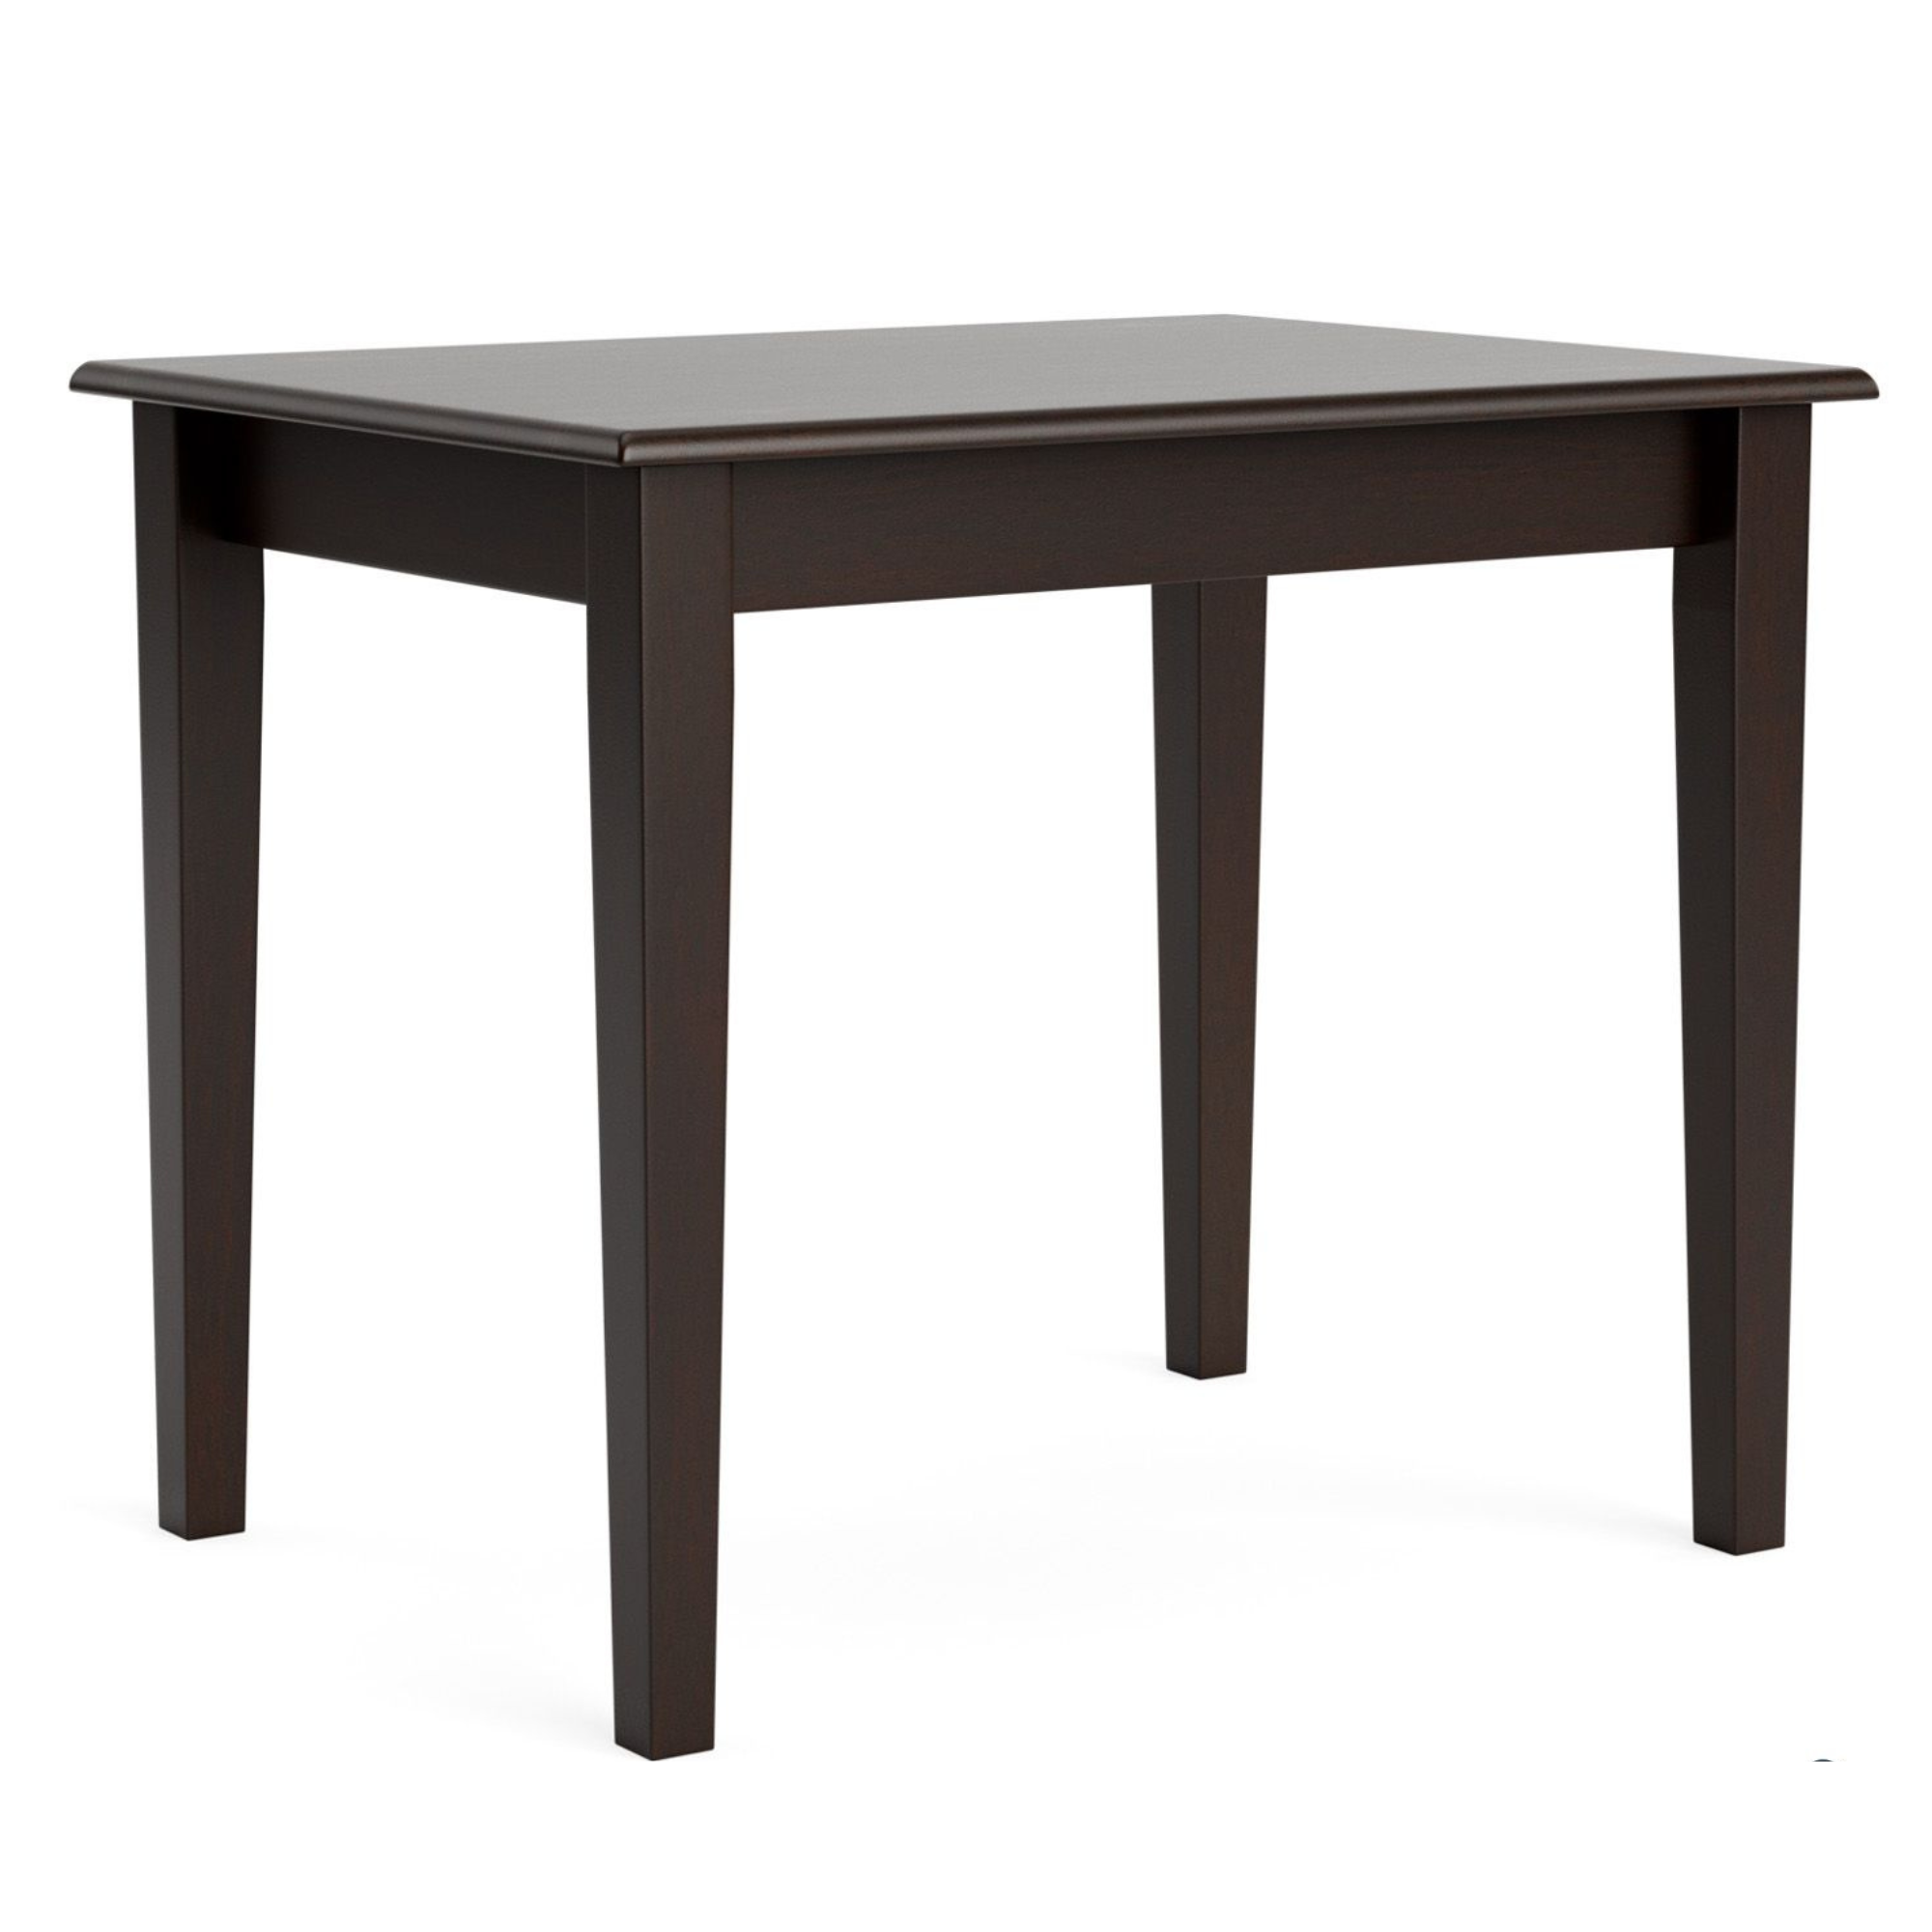 VILLAGER 900 DINING TABLE | NZ MADE